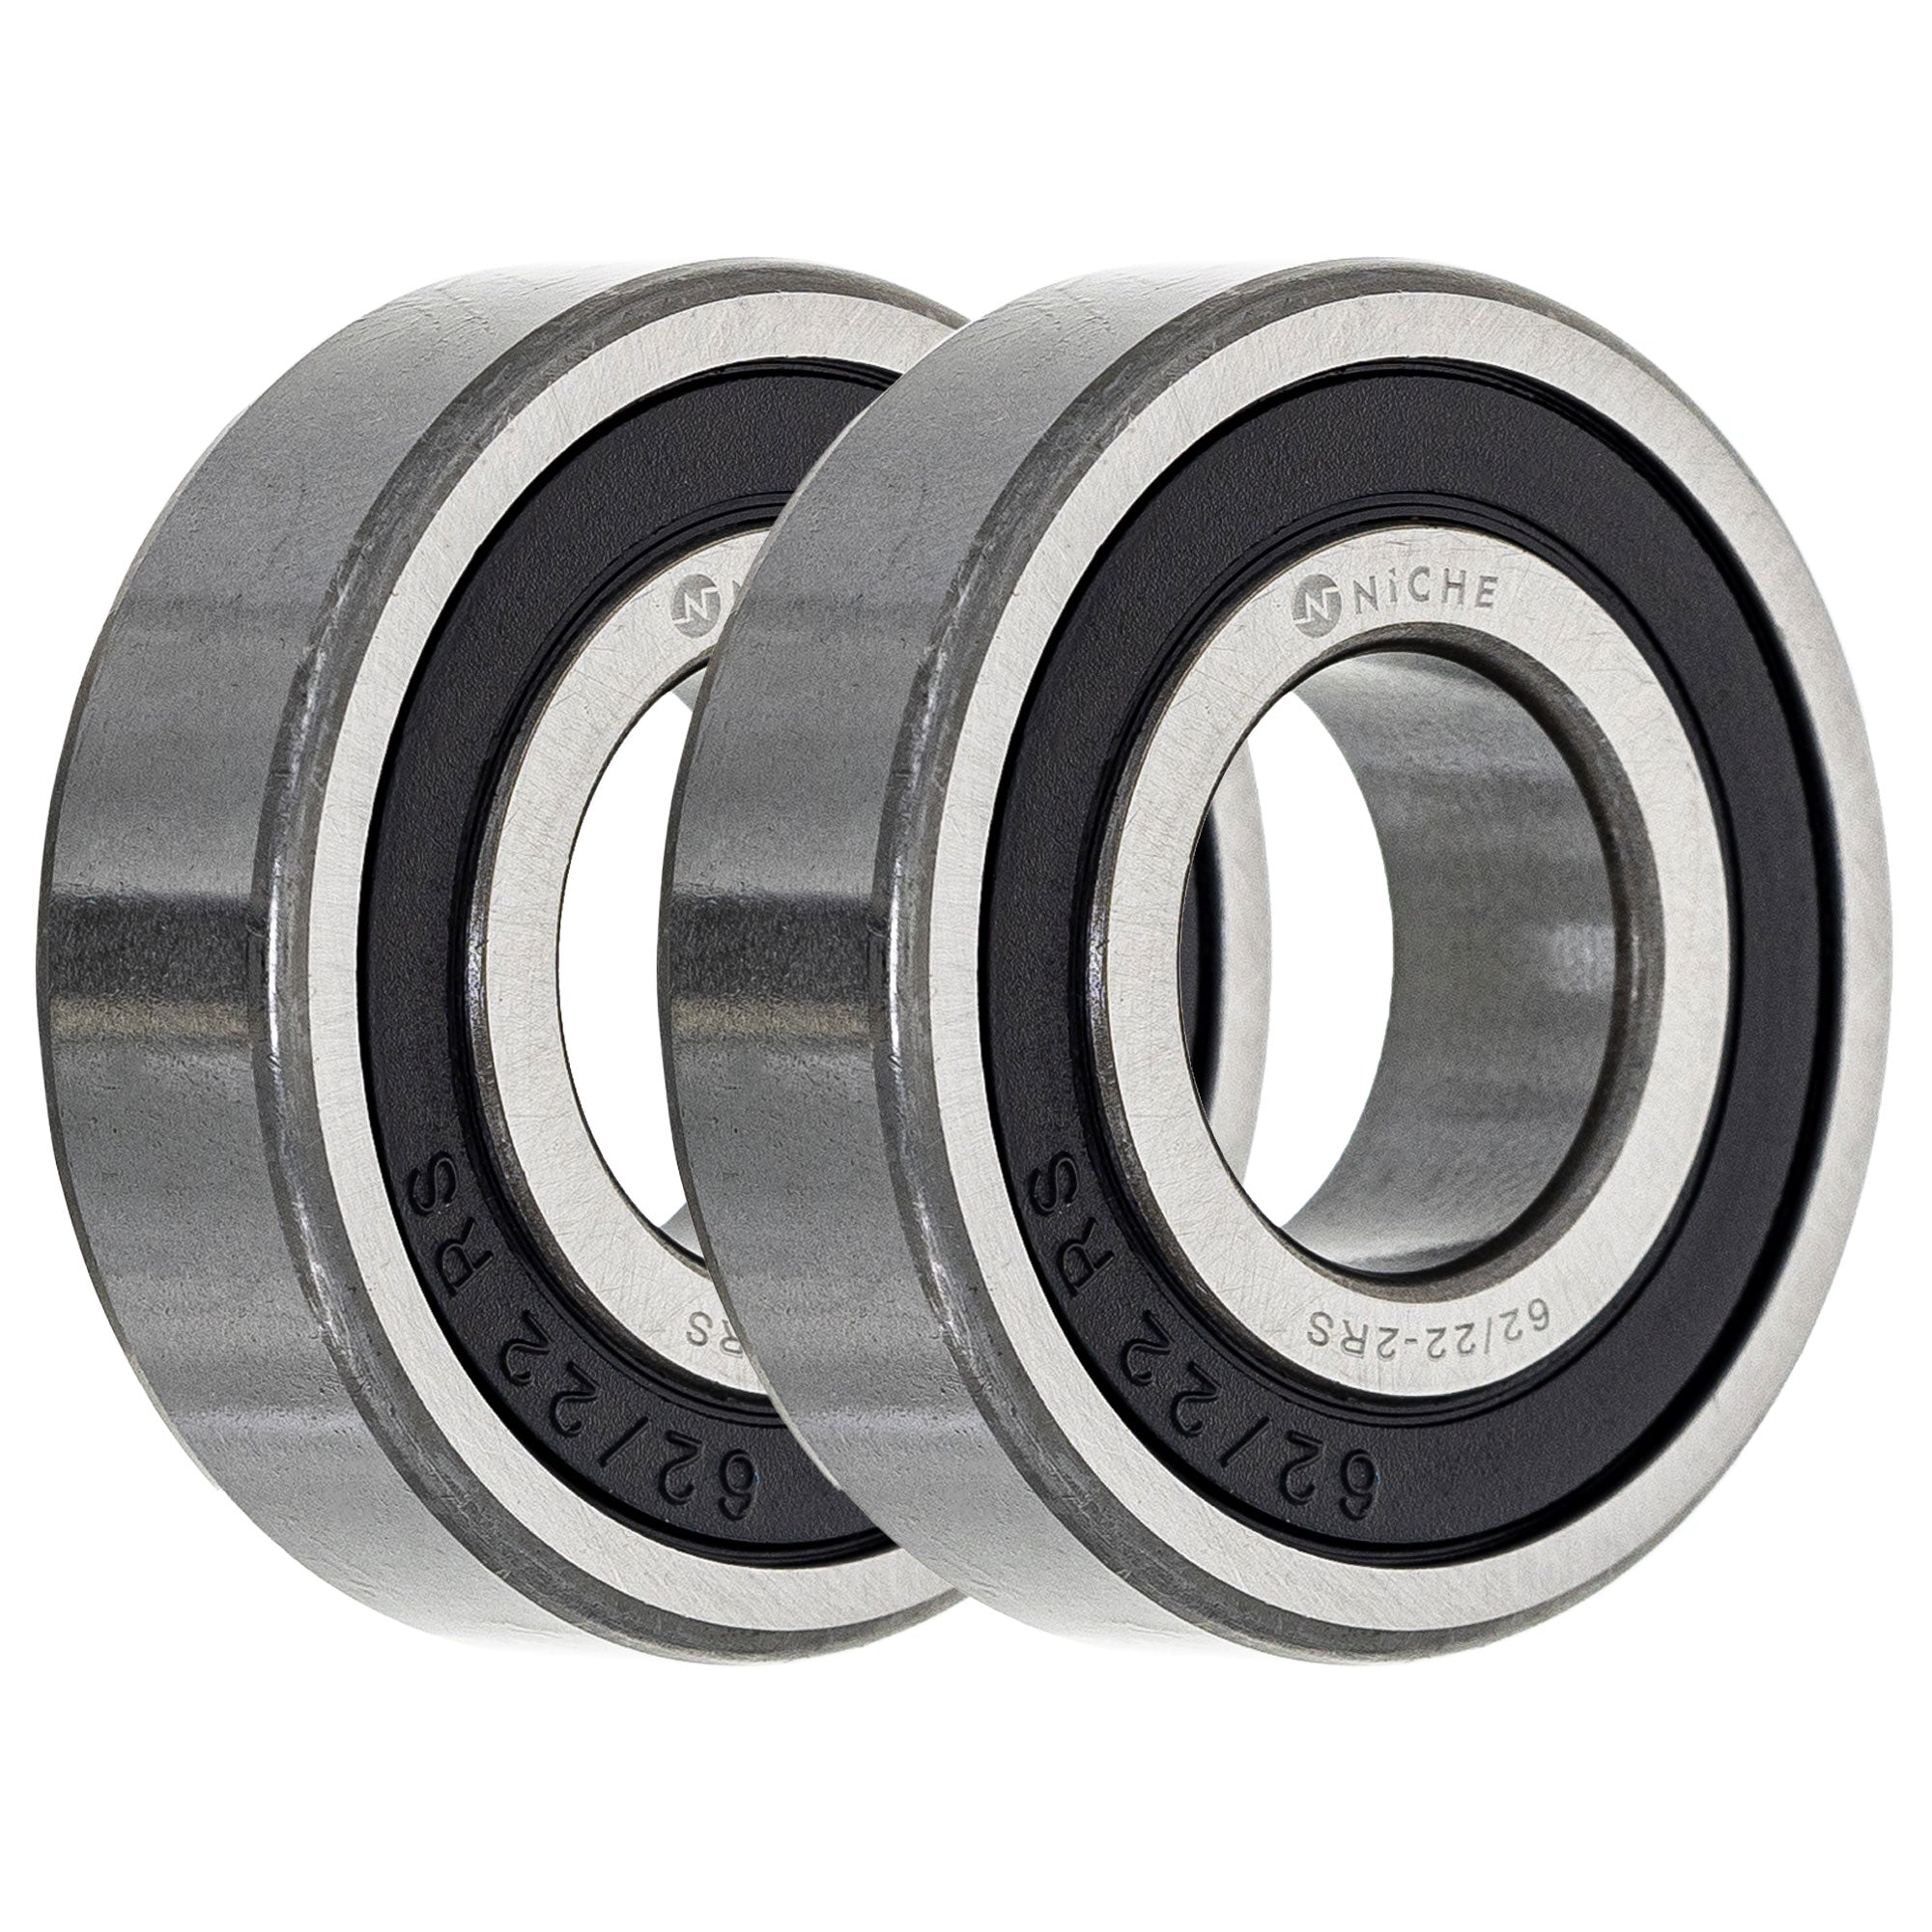 Single Row, Deep Groove, Ball Bearing Pack of 2 2-Pack for zOTHER Shadow CBR900RR CBR600F3 NICHE 519-CBB2271R